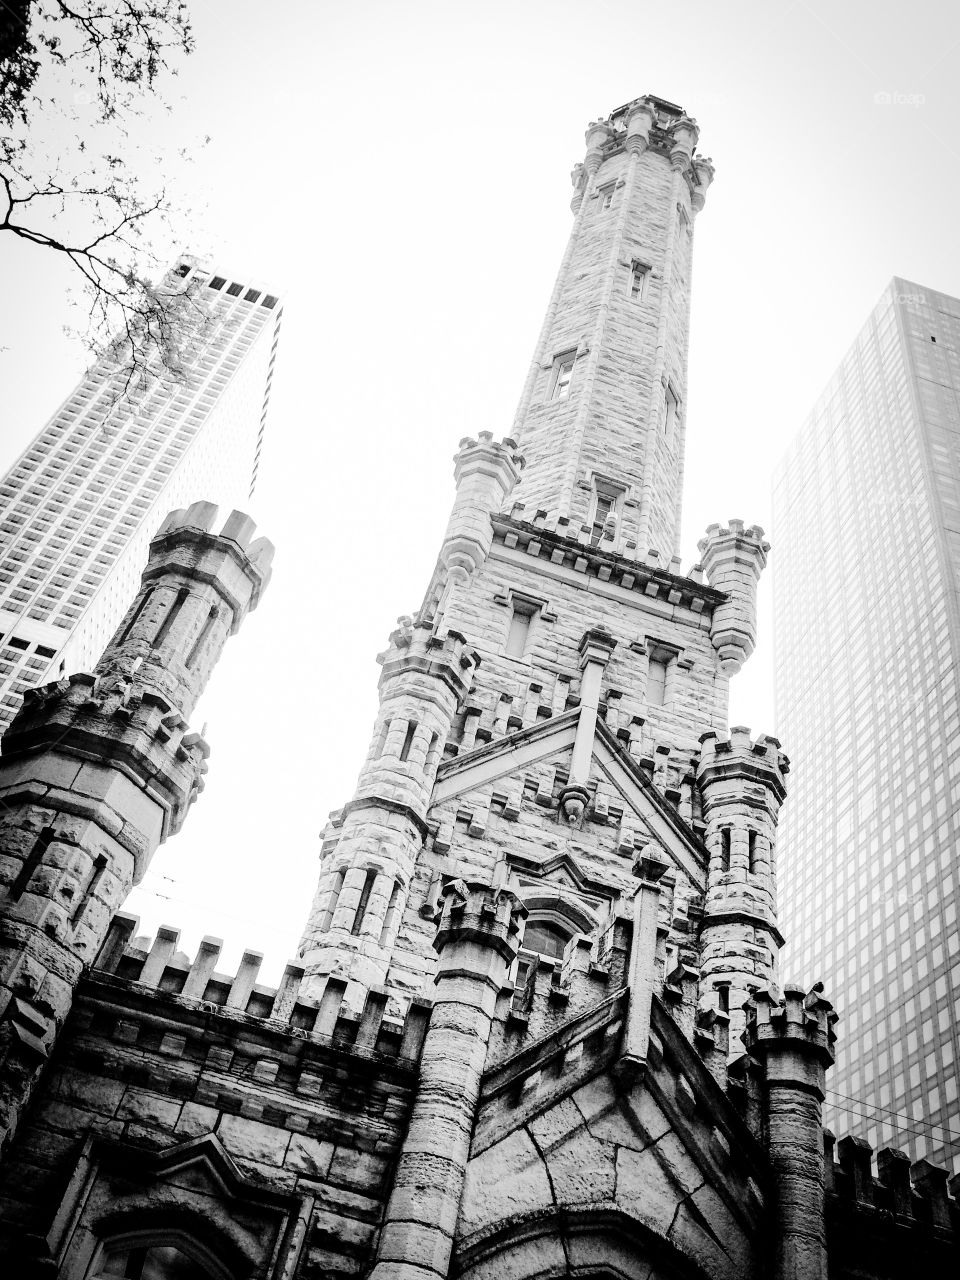 Chicago's Old Watertower. The symbolic survivor of the Great Chicago Fire. 